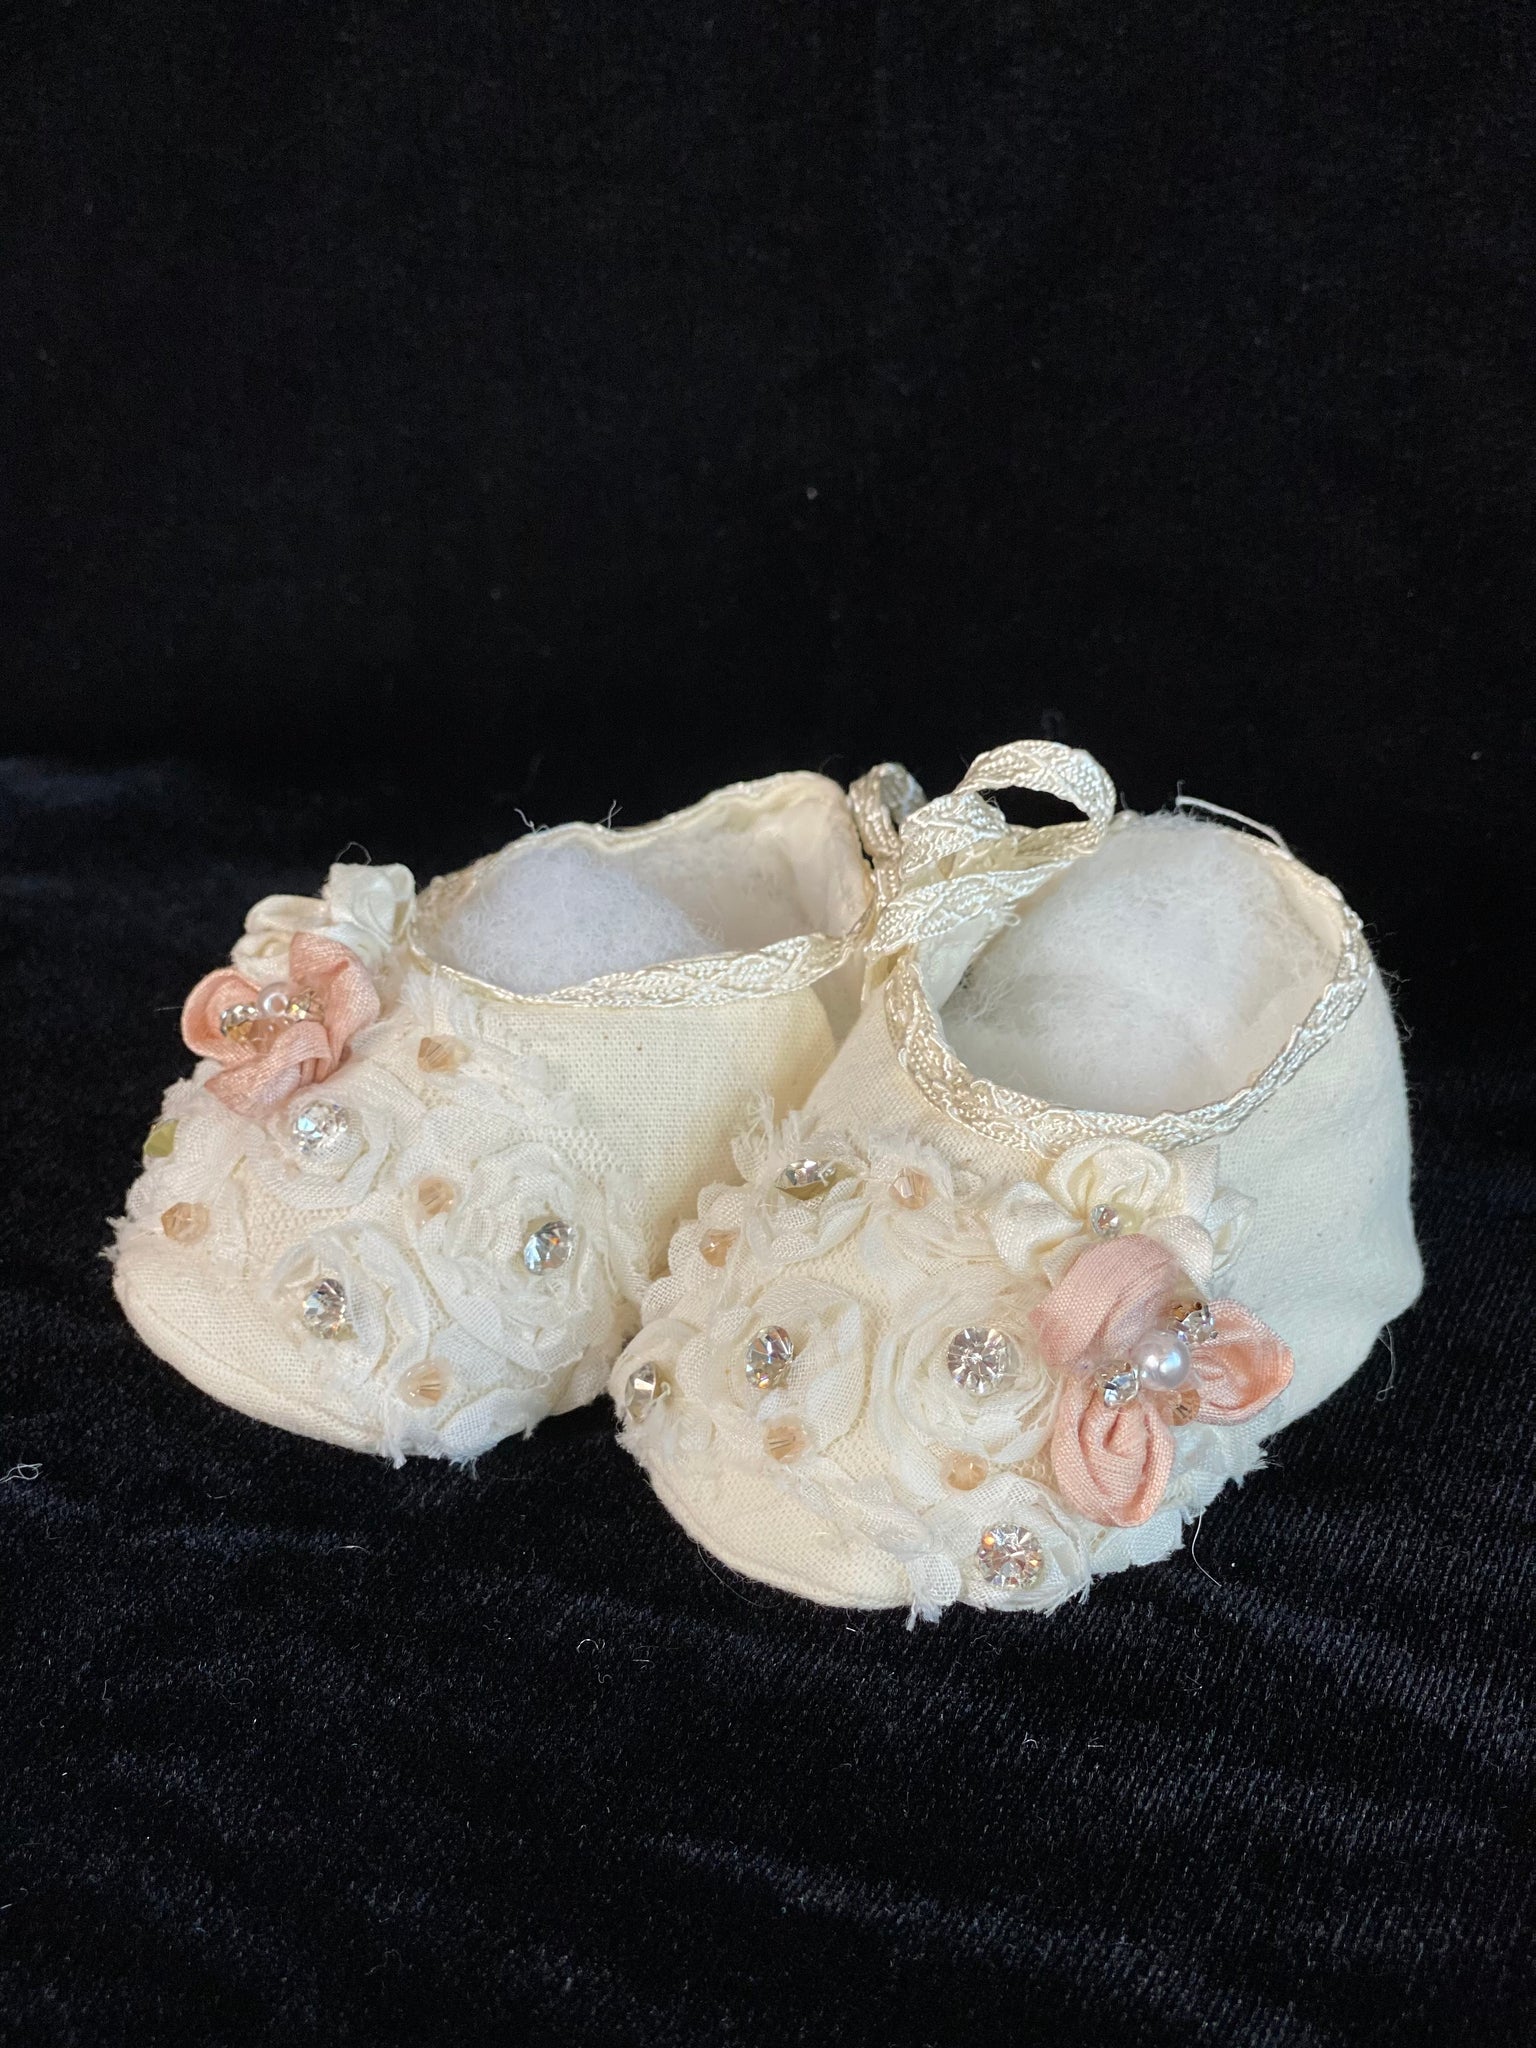 Elegant handmade English style ankle boots in ivory/white with embroidery, jewels, flowers, and lace. 